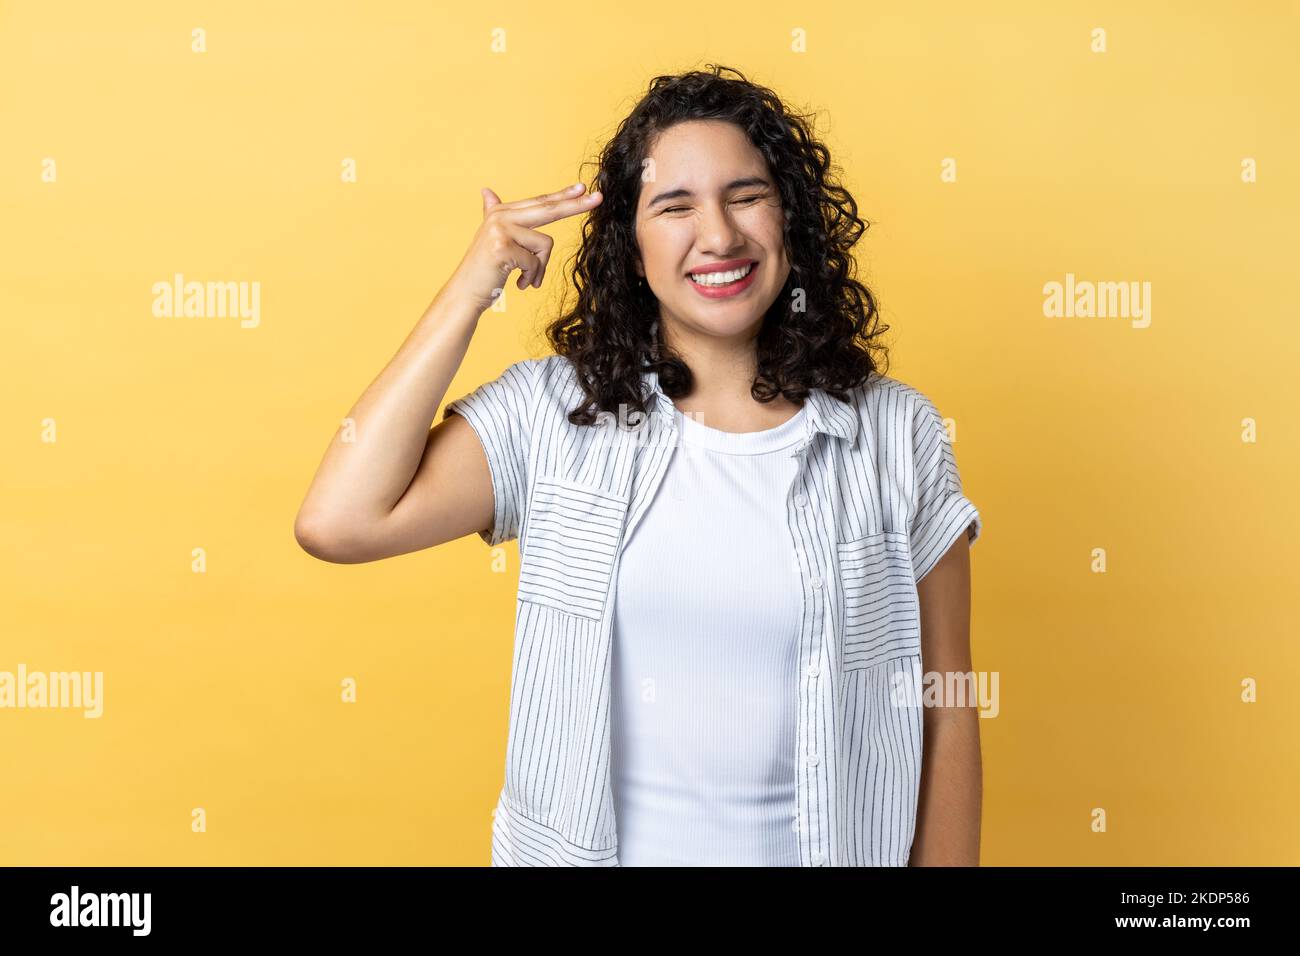 Portrait of woman with dark wavy hair pointing finger gun to head and looking desperate, making suicide gesture, shooting herself. Indoor studio shot isolated on yellow background. Stock Photo